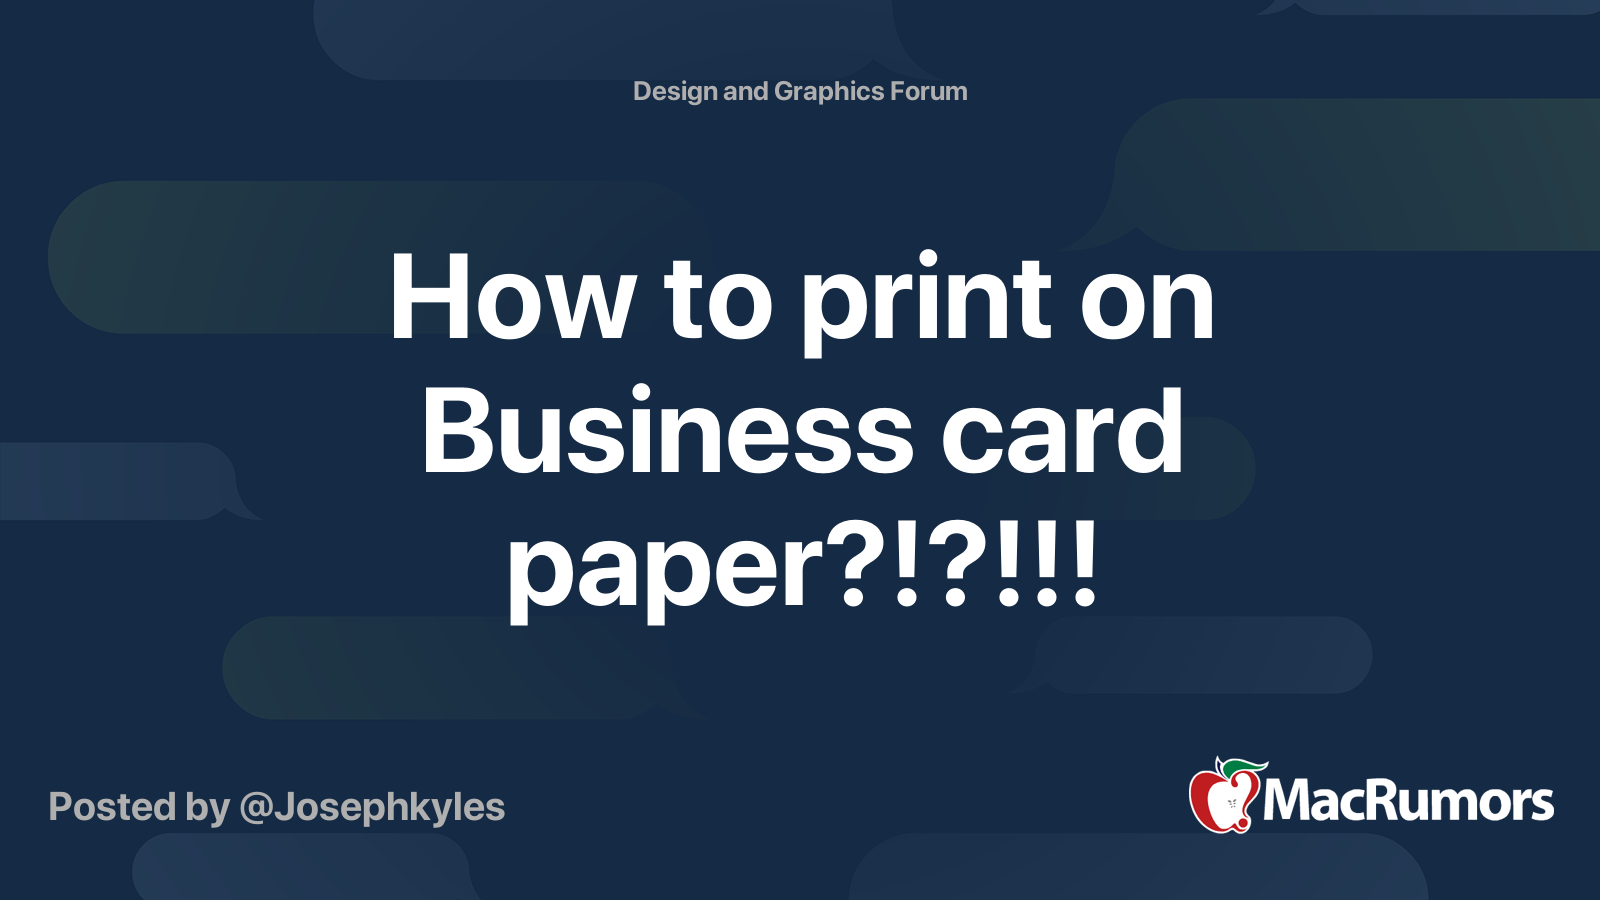 how-to-print-on-business-card-paper-macrumors-forums